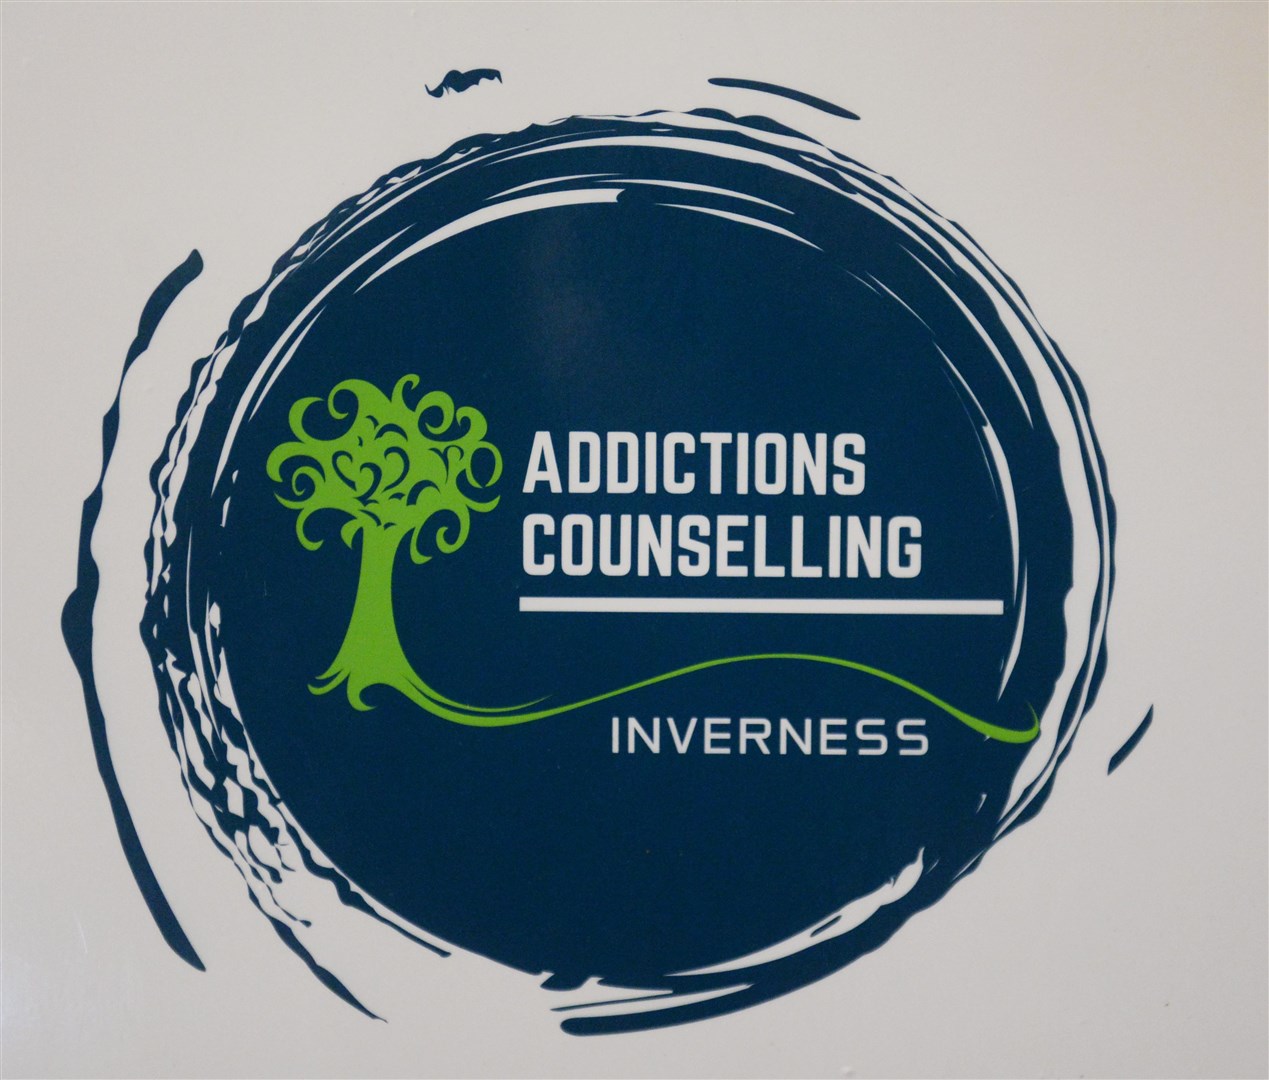 Addictions Counselling Inverness.